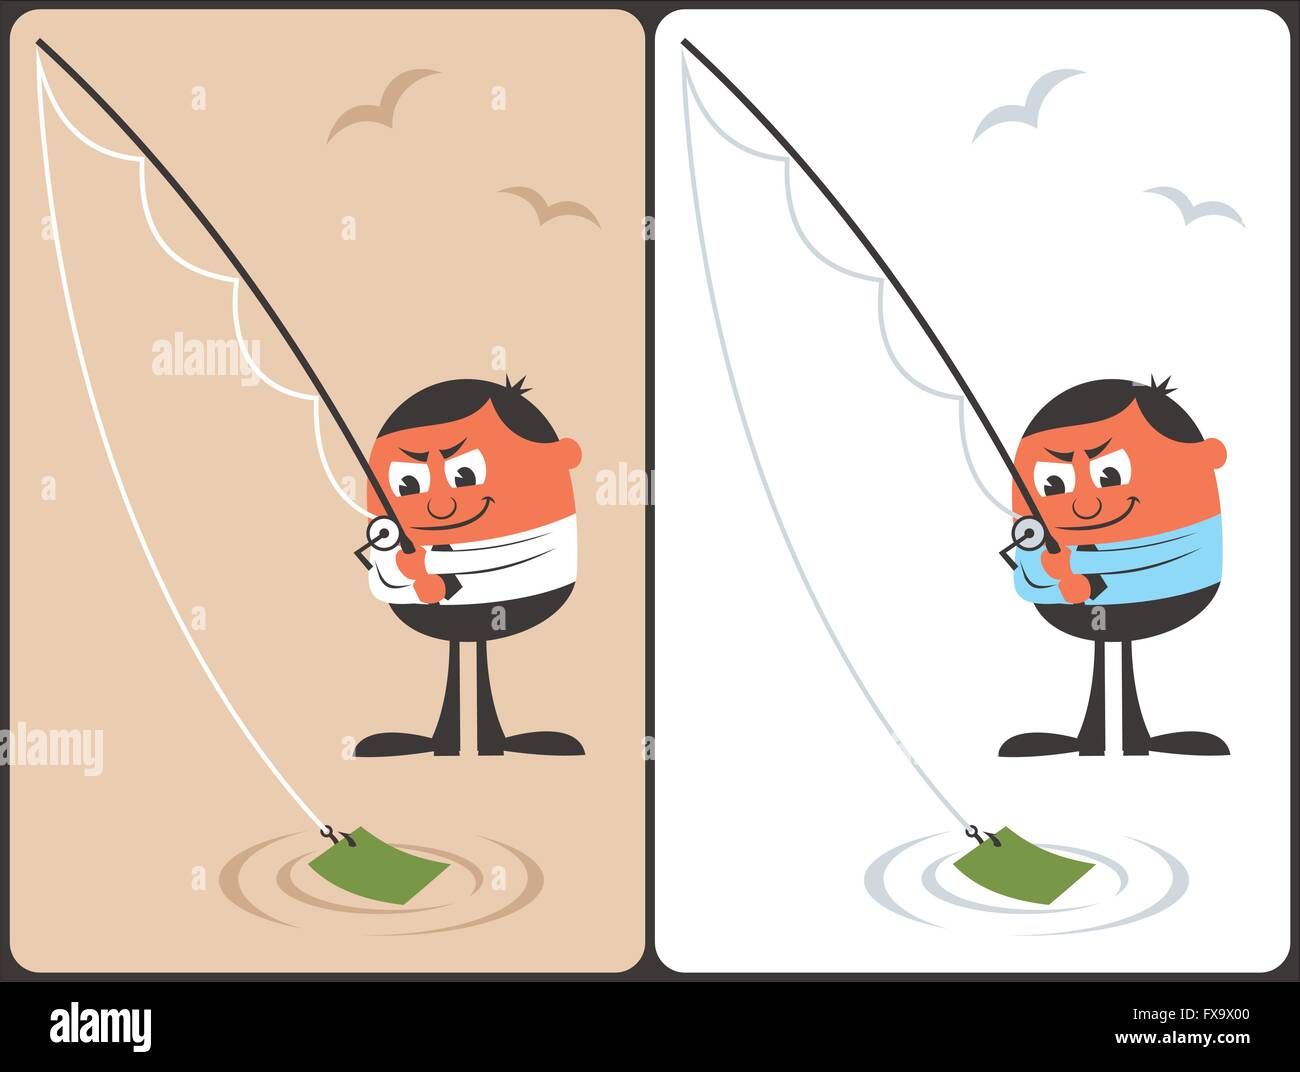 Fishing hook no bait Stock Vector Images - Alamy